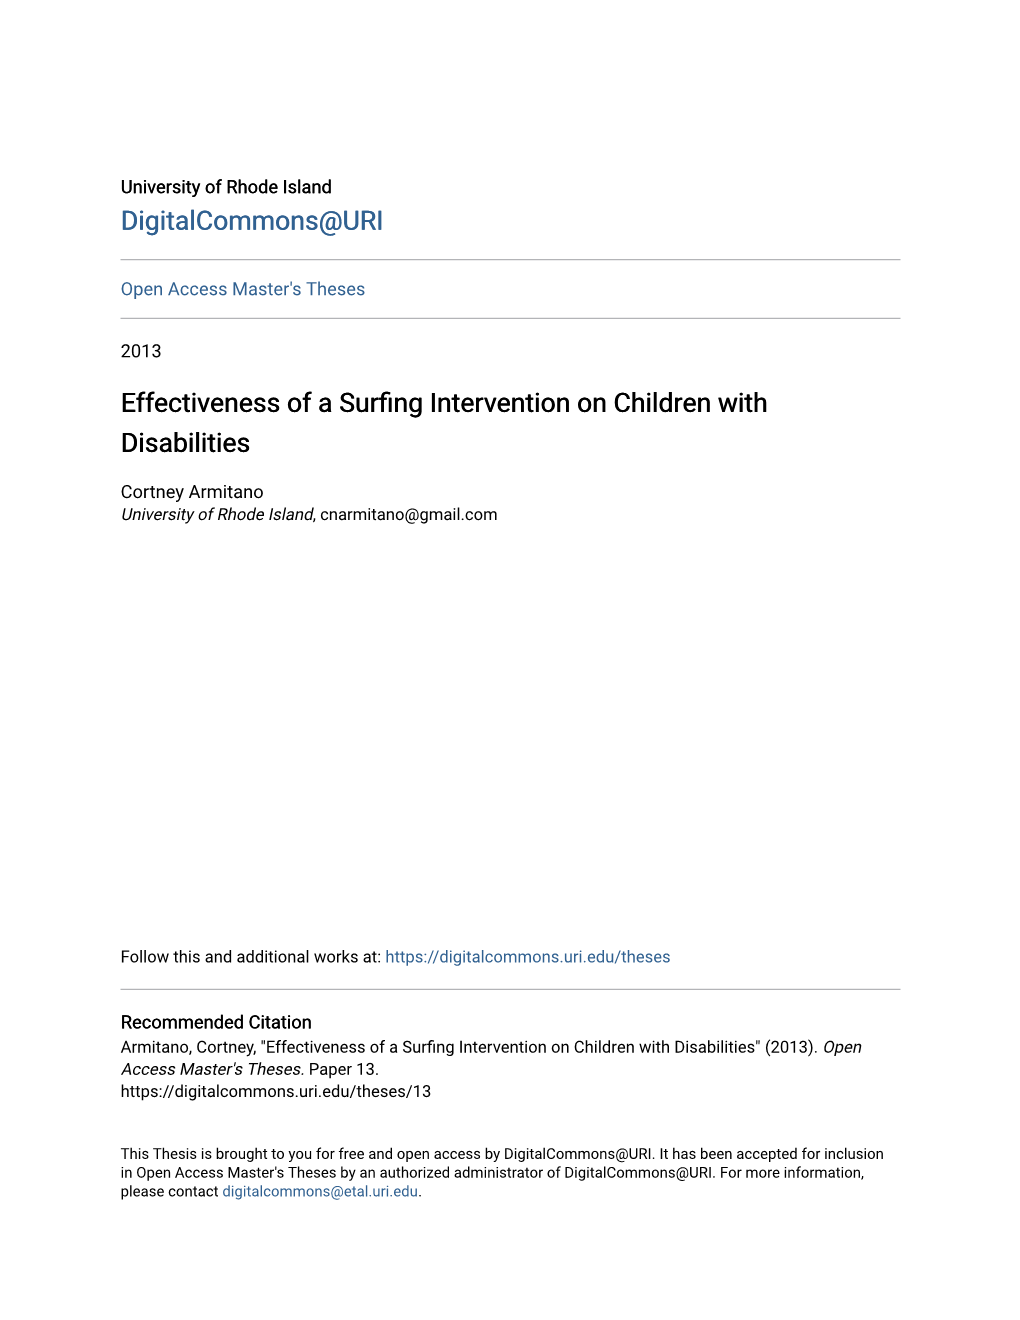 Effectiveness of a Surfing Intervention on Children with Disabilities